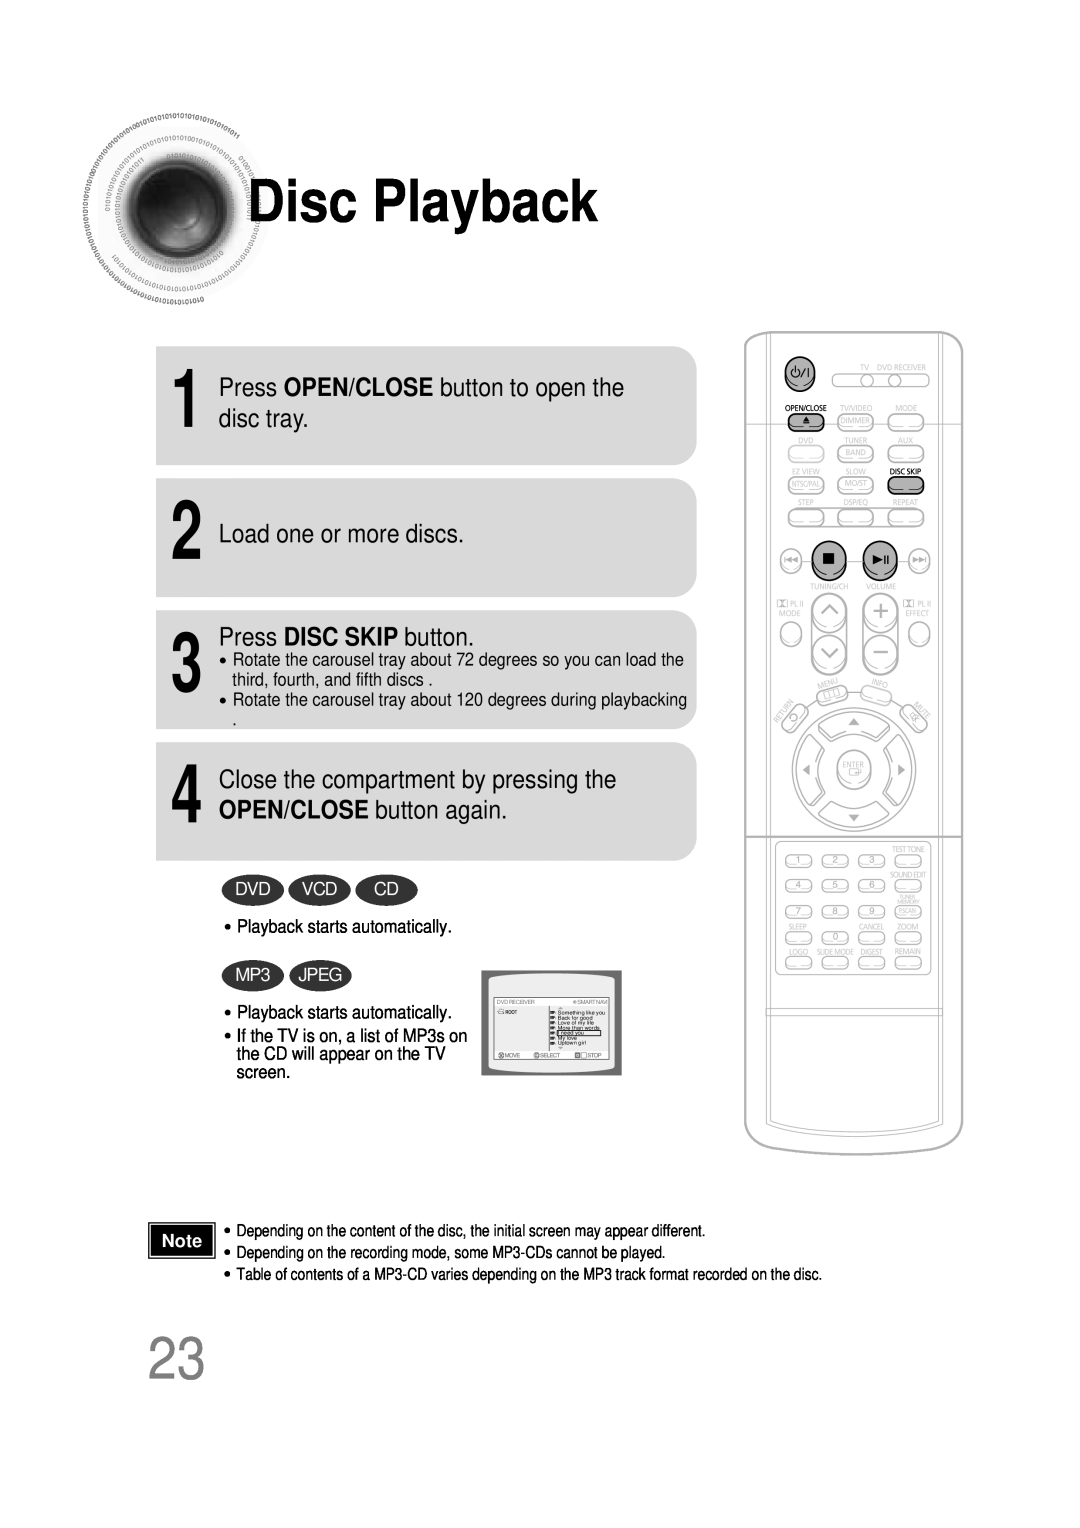 Samsung HT-DB600 Disc Playback, Press OPEN/CLOSE button to open the disc tray Load one or more discs, Dvd Vcd Cd, MP3 JPEG 